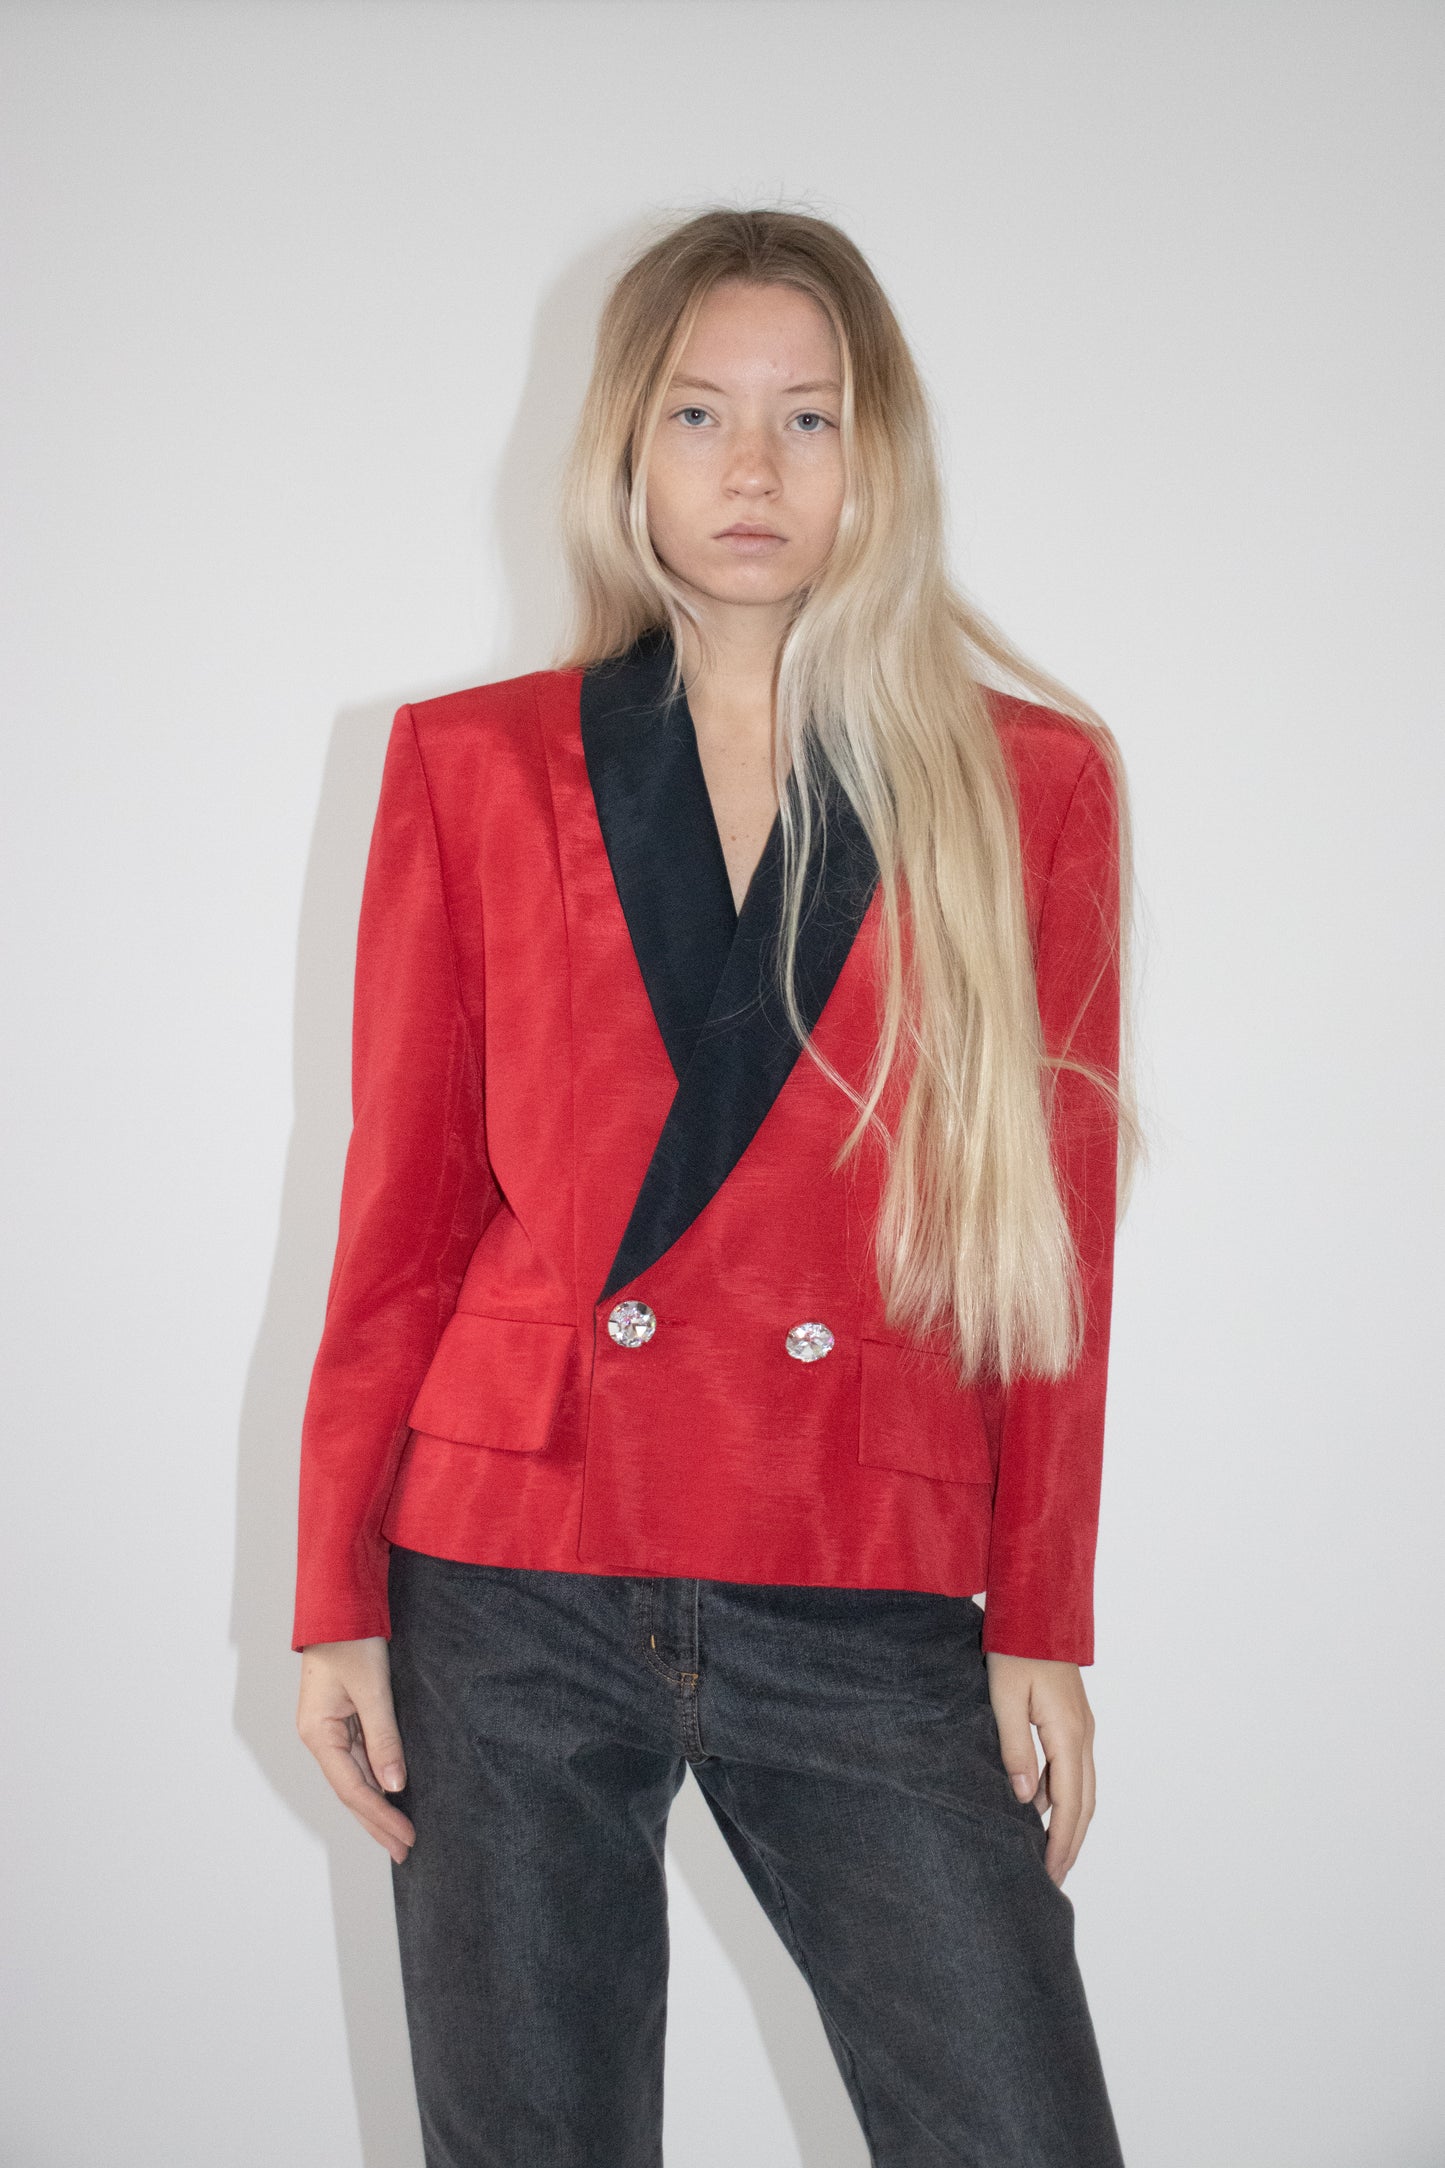 Red and black jacket